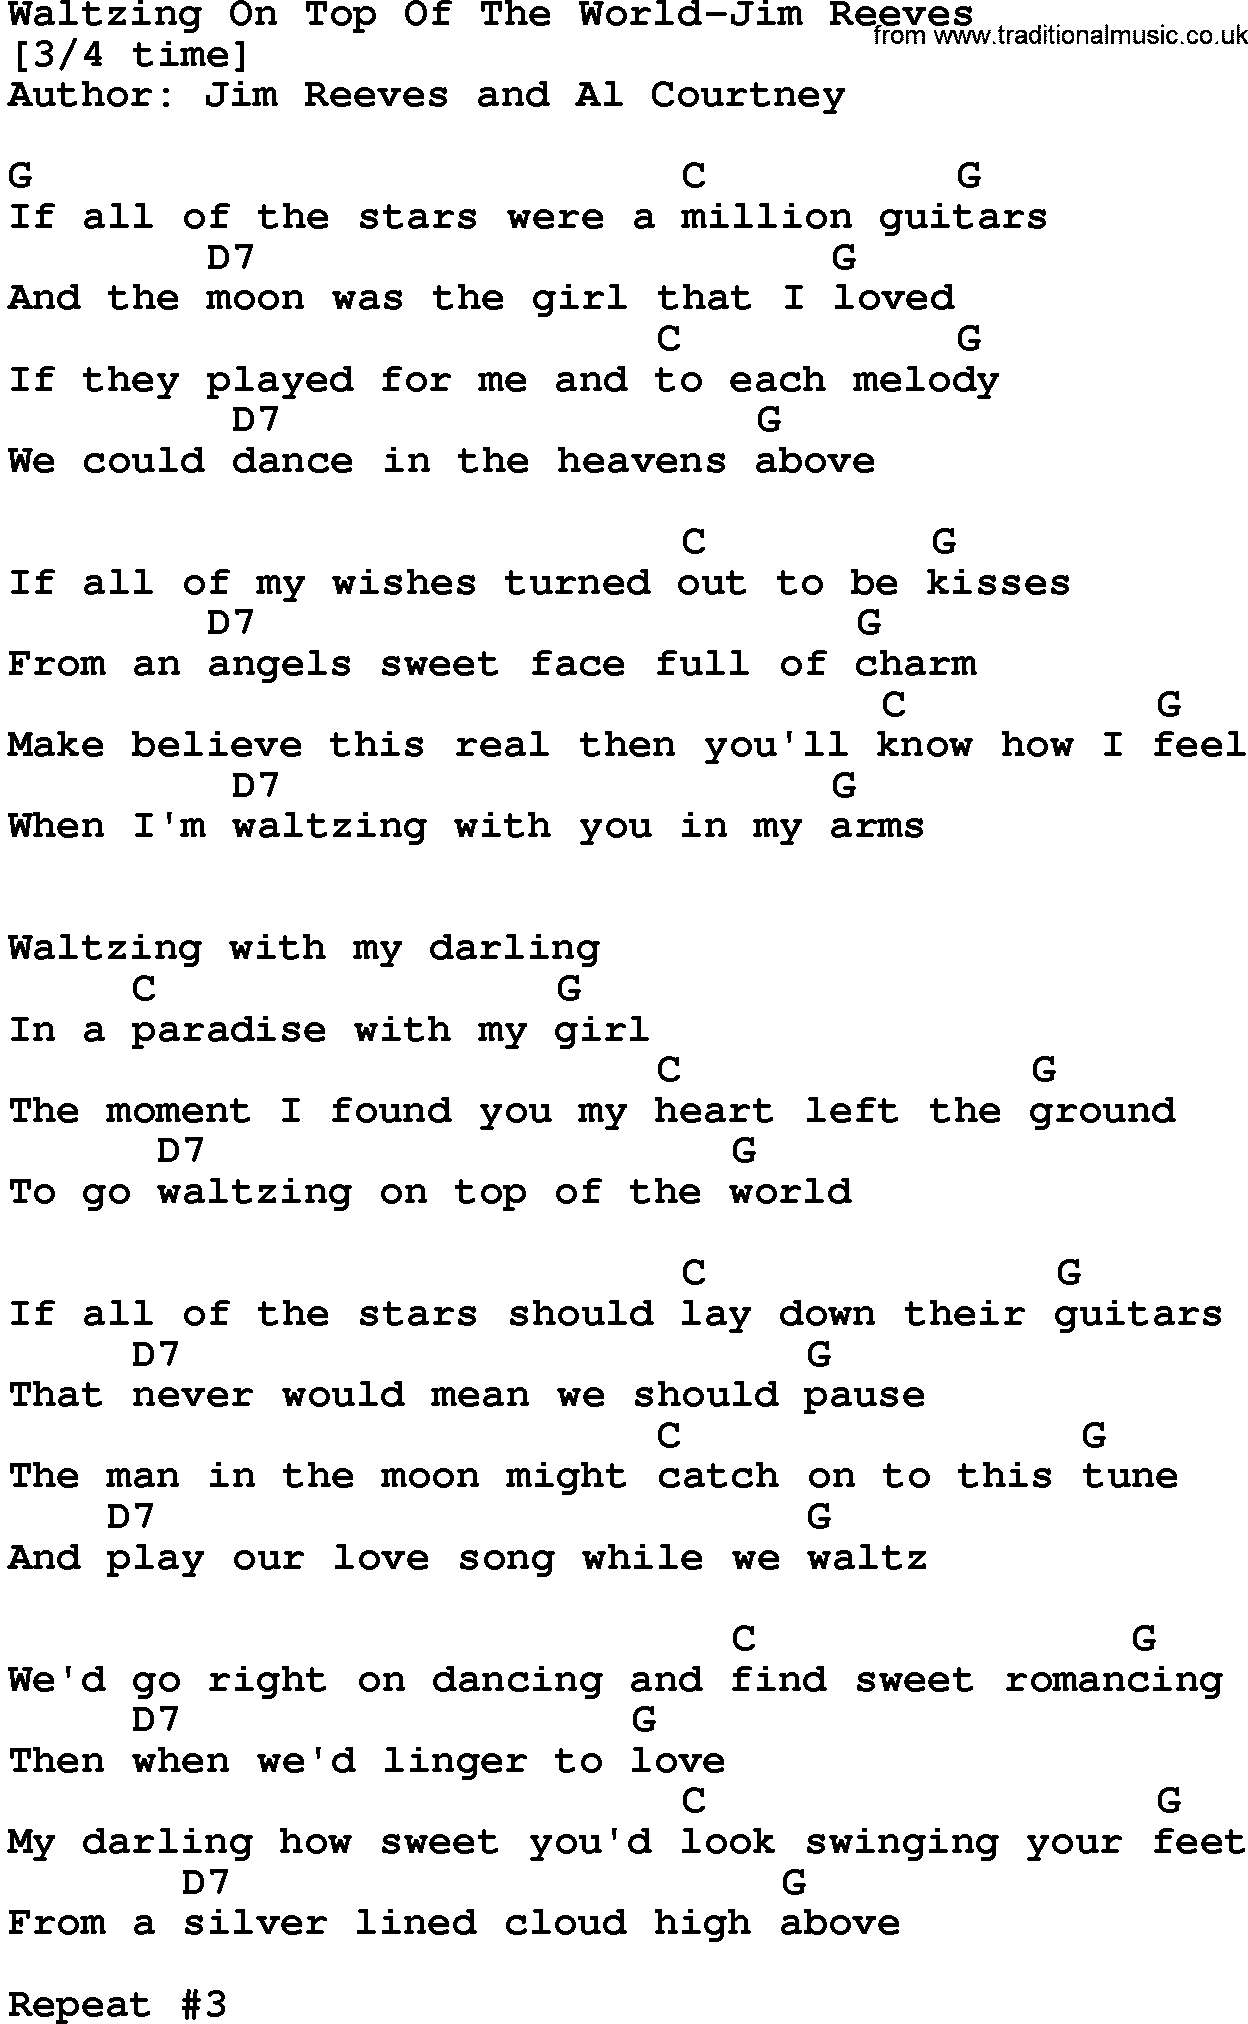 Country music song: Waltzing On Top Of The World-Jim Reeves lyrics and chords